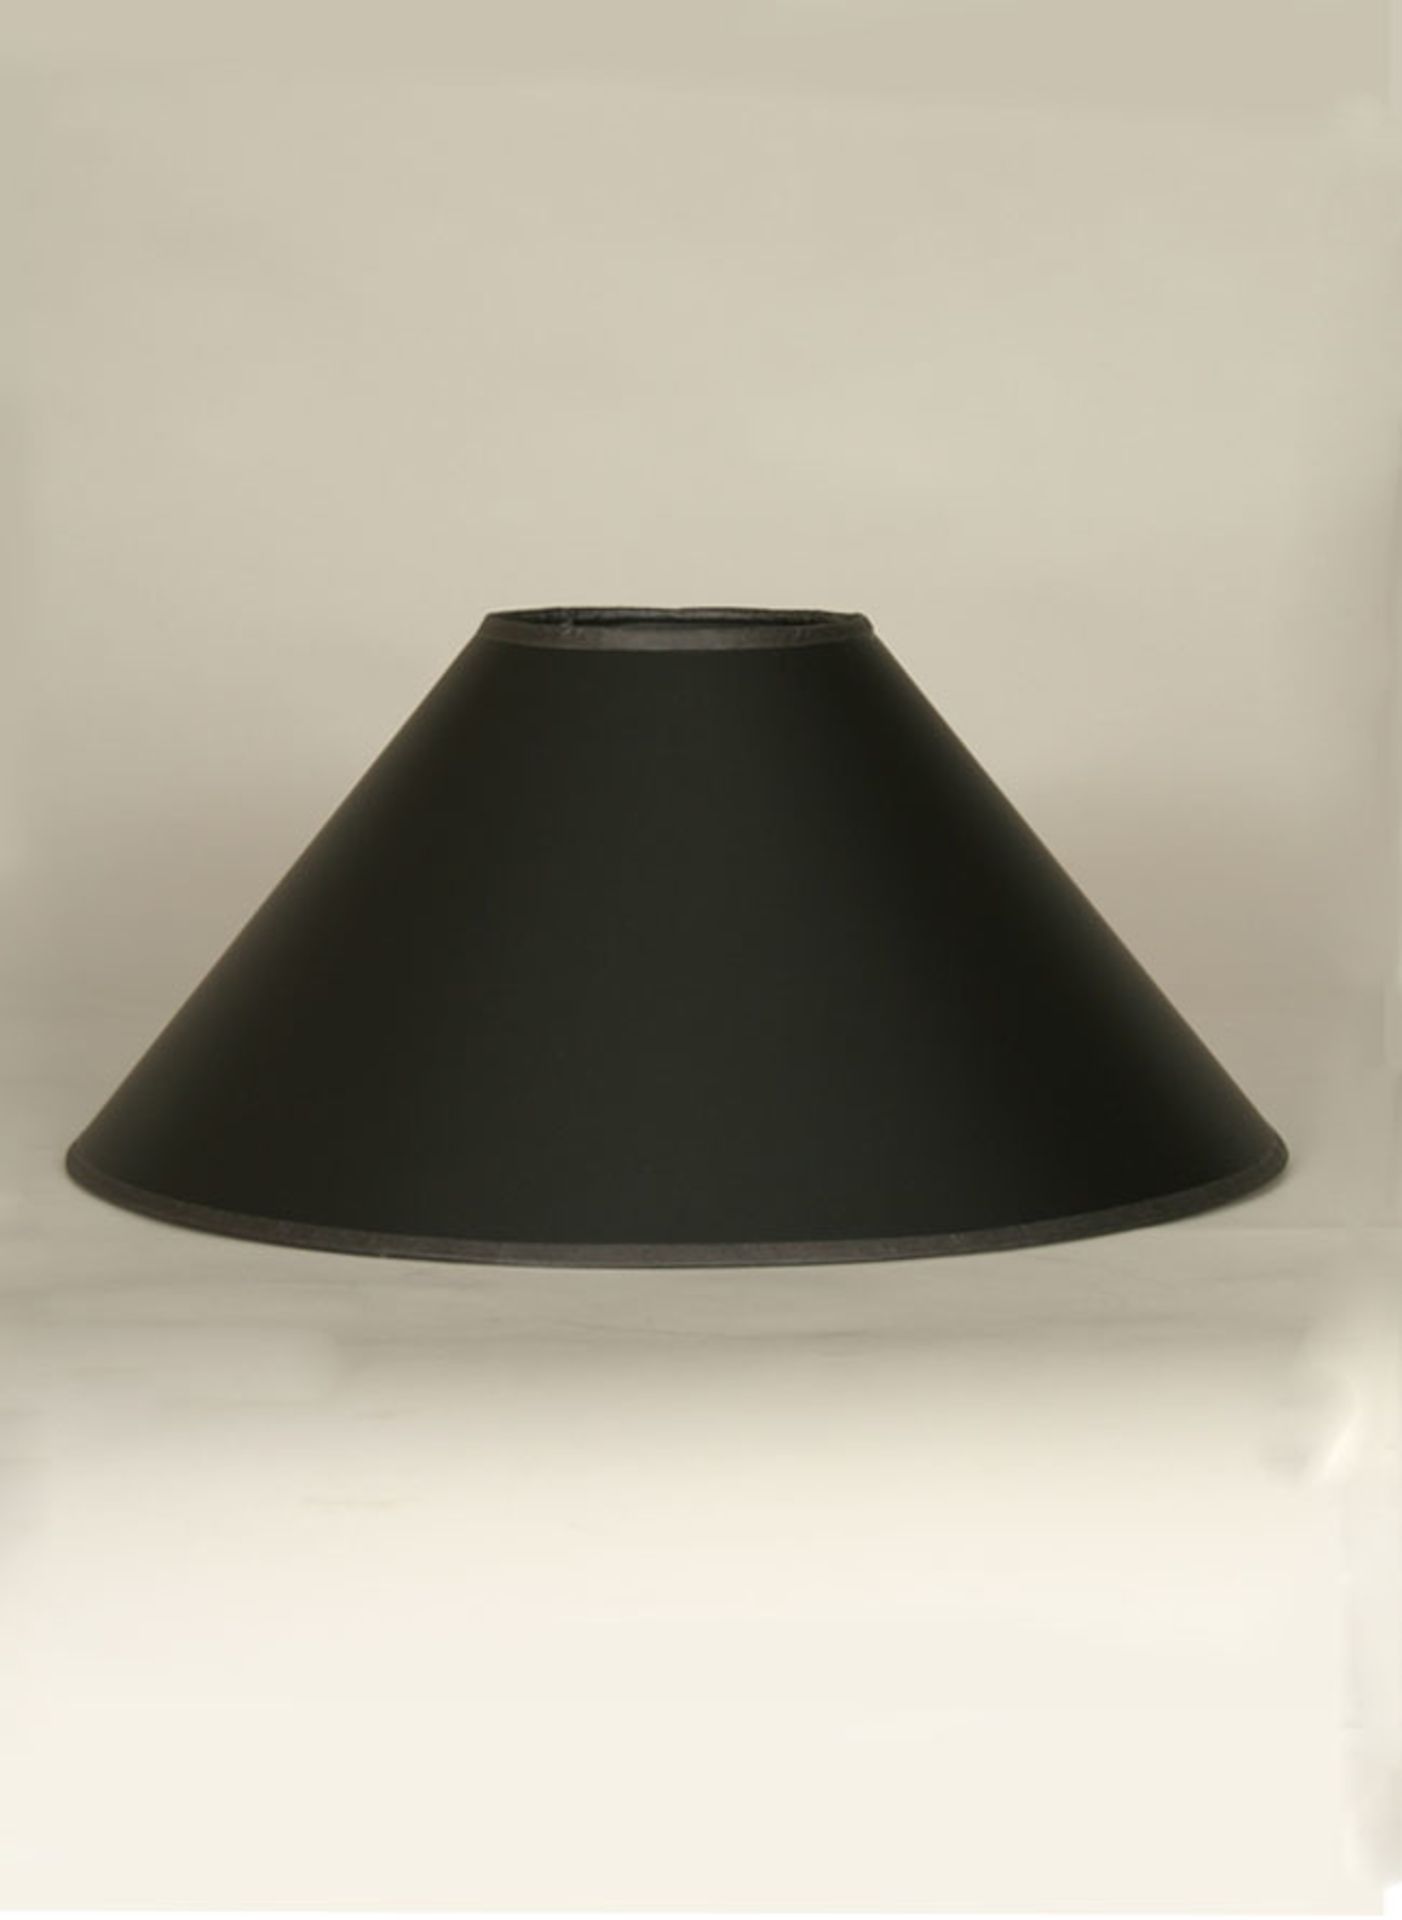 Coolie Shade Hemp Charcoal 75 5 x 75 5 x 26cm The Rounded Shape And Opal Interiors Of These Coolie (